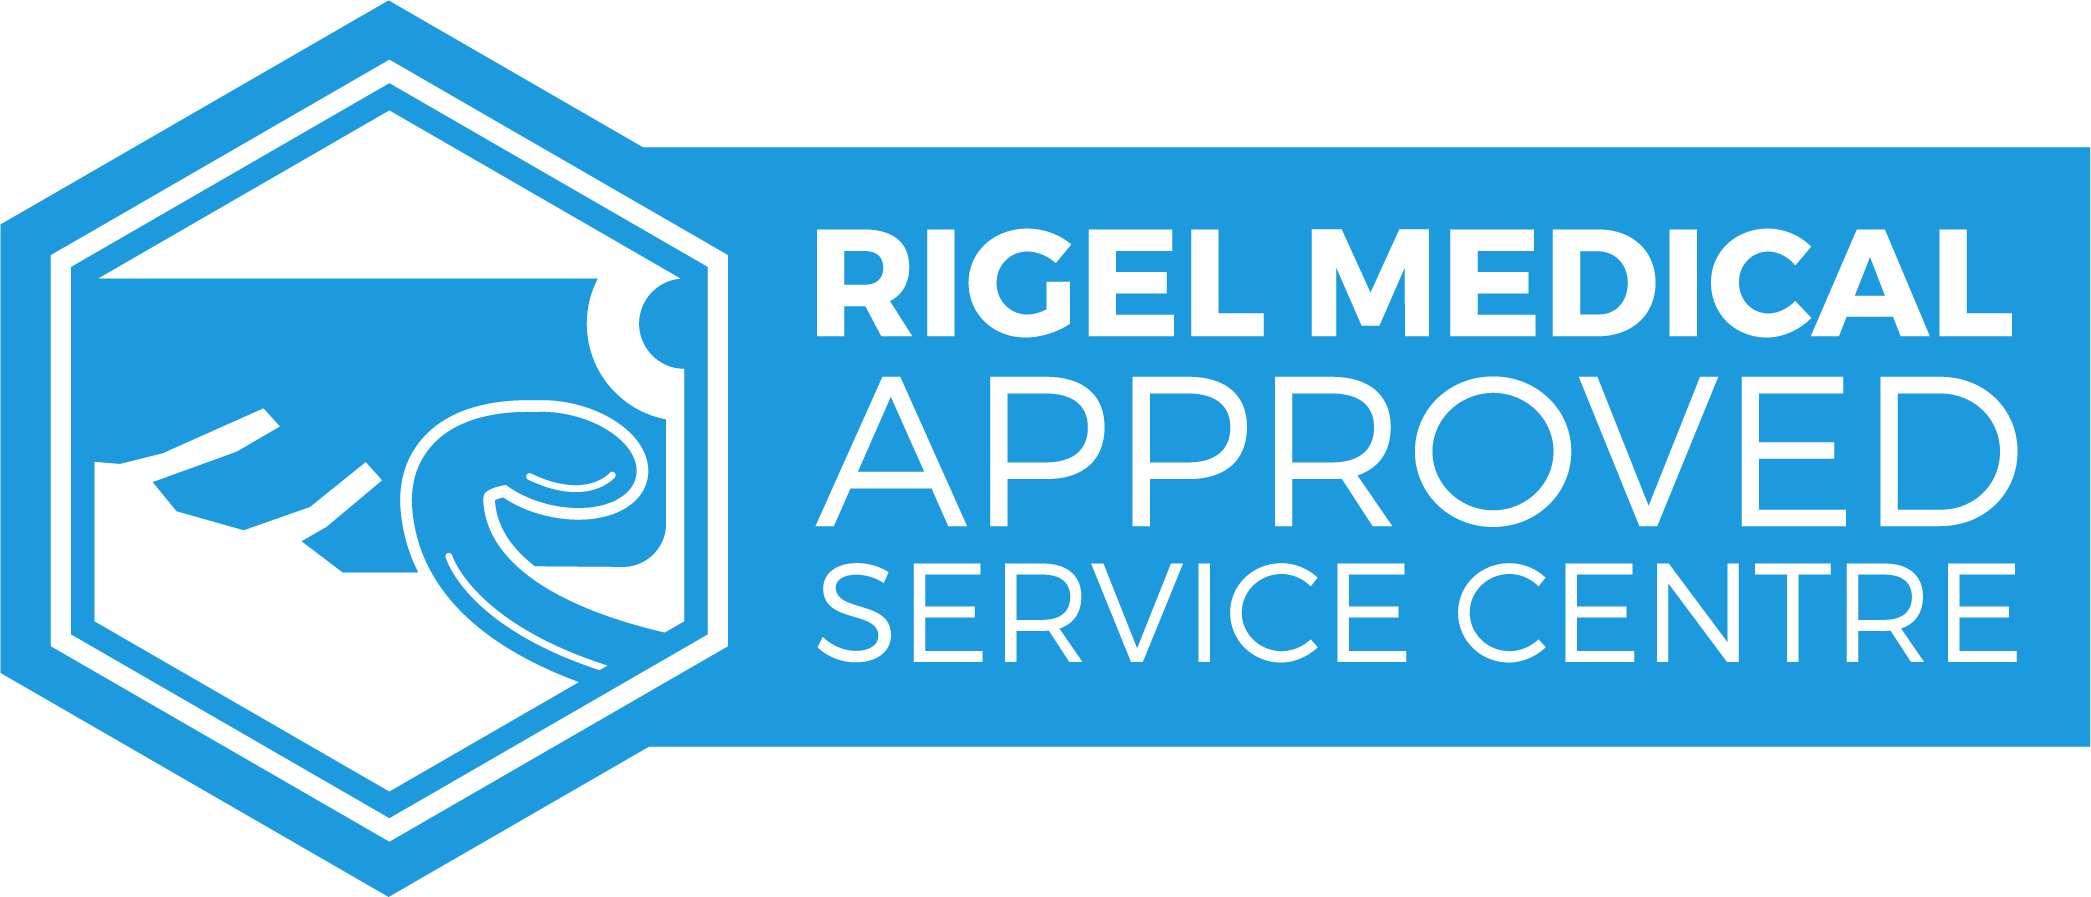 Rigel Approved Service Centre_White Blue P2925_72dpi.png